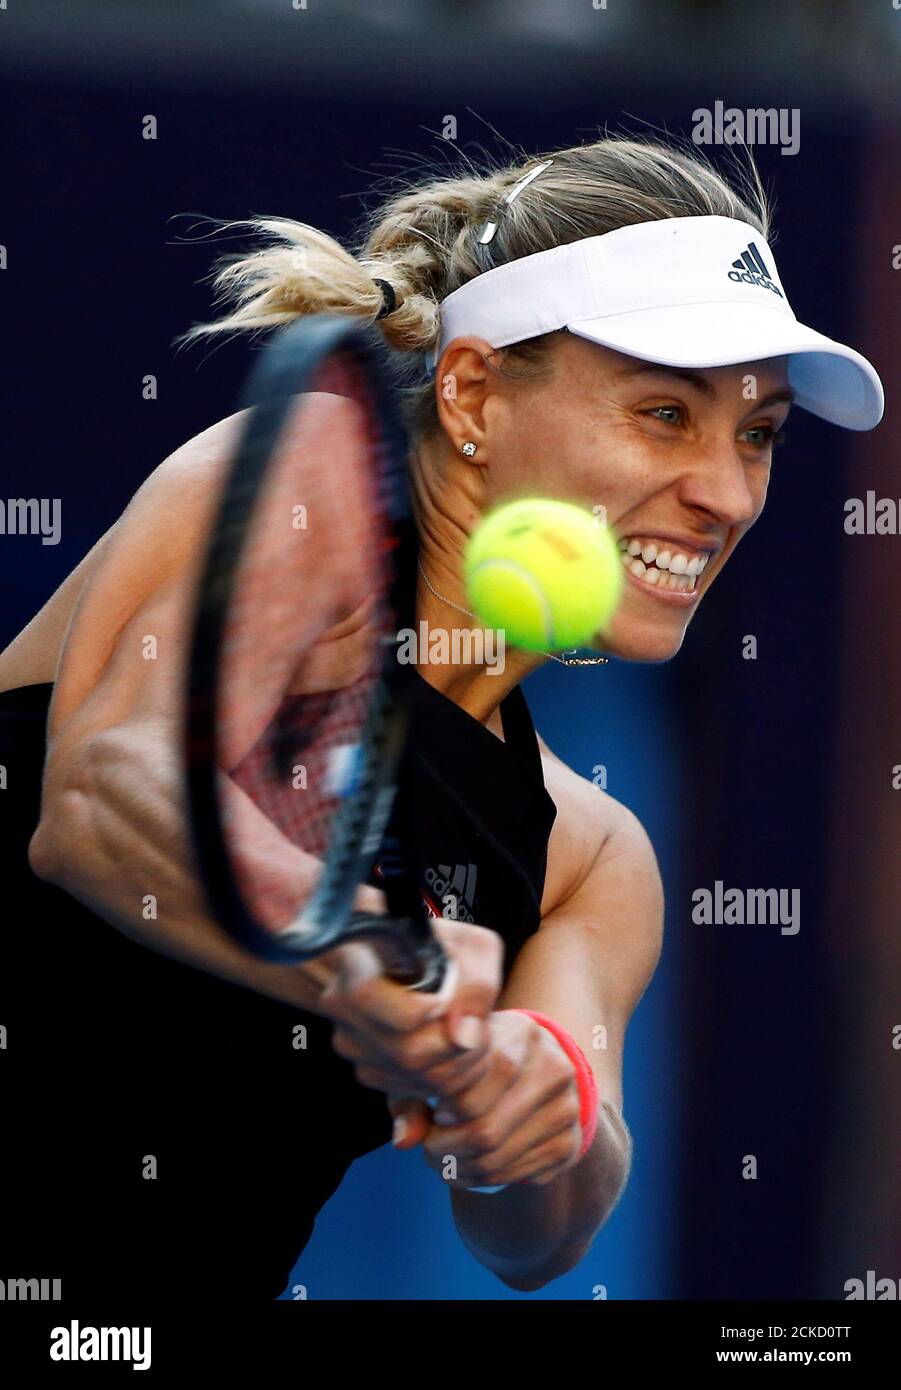 Tennis - China Open - Women's Singles - Beijing, China - October 2, 2018 -  Angelique Kerber of Germany in action against Carla Suarez Navarro of  Spain. REUTERS/Thomas Peter Stock Photo - Alamy